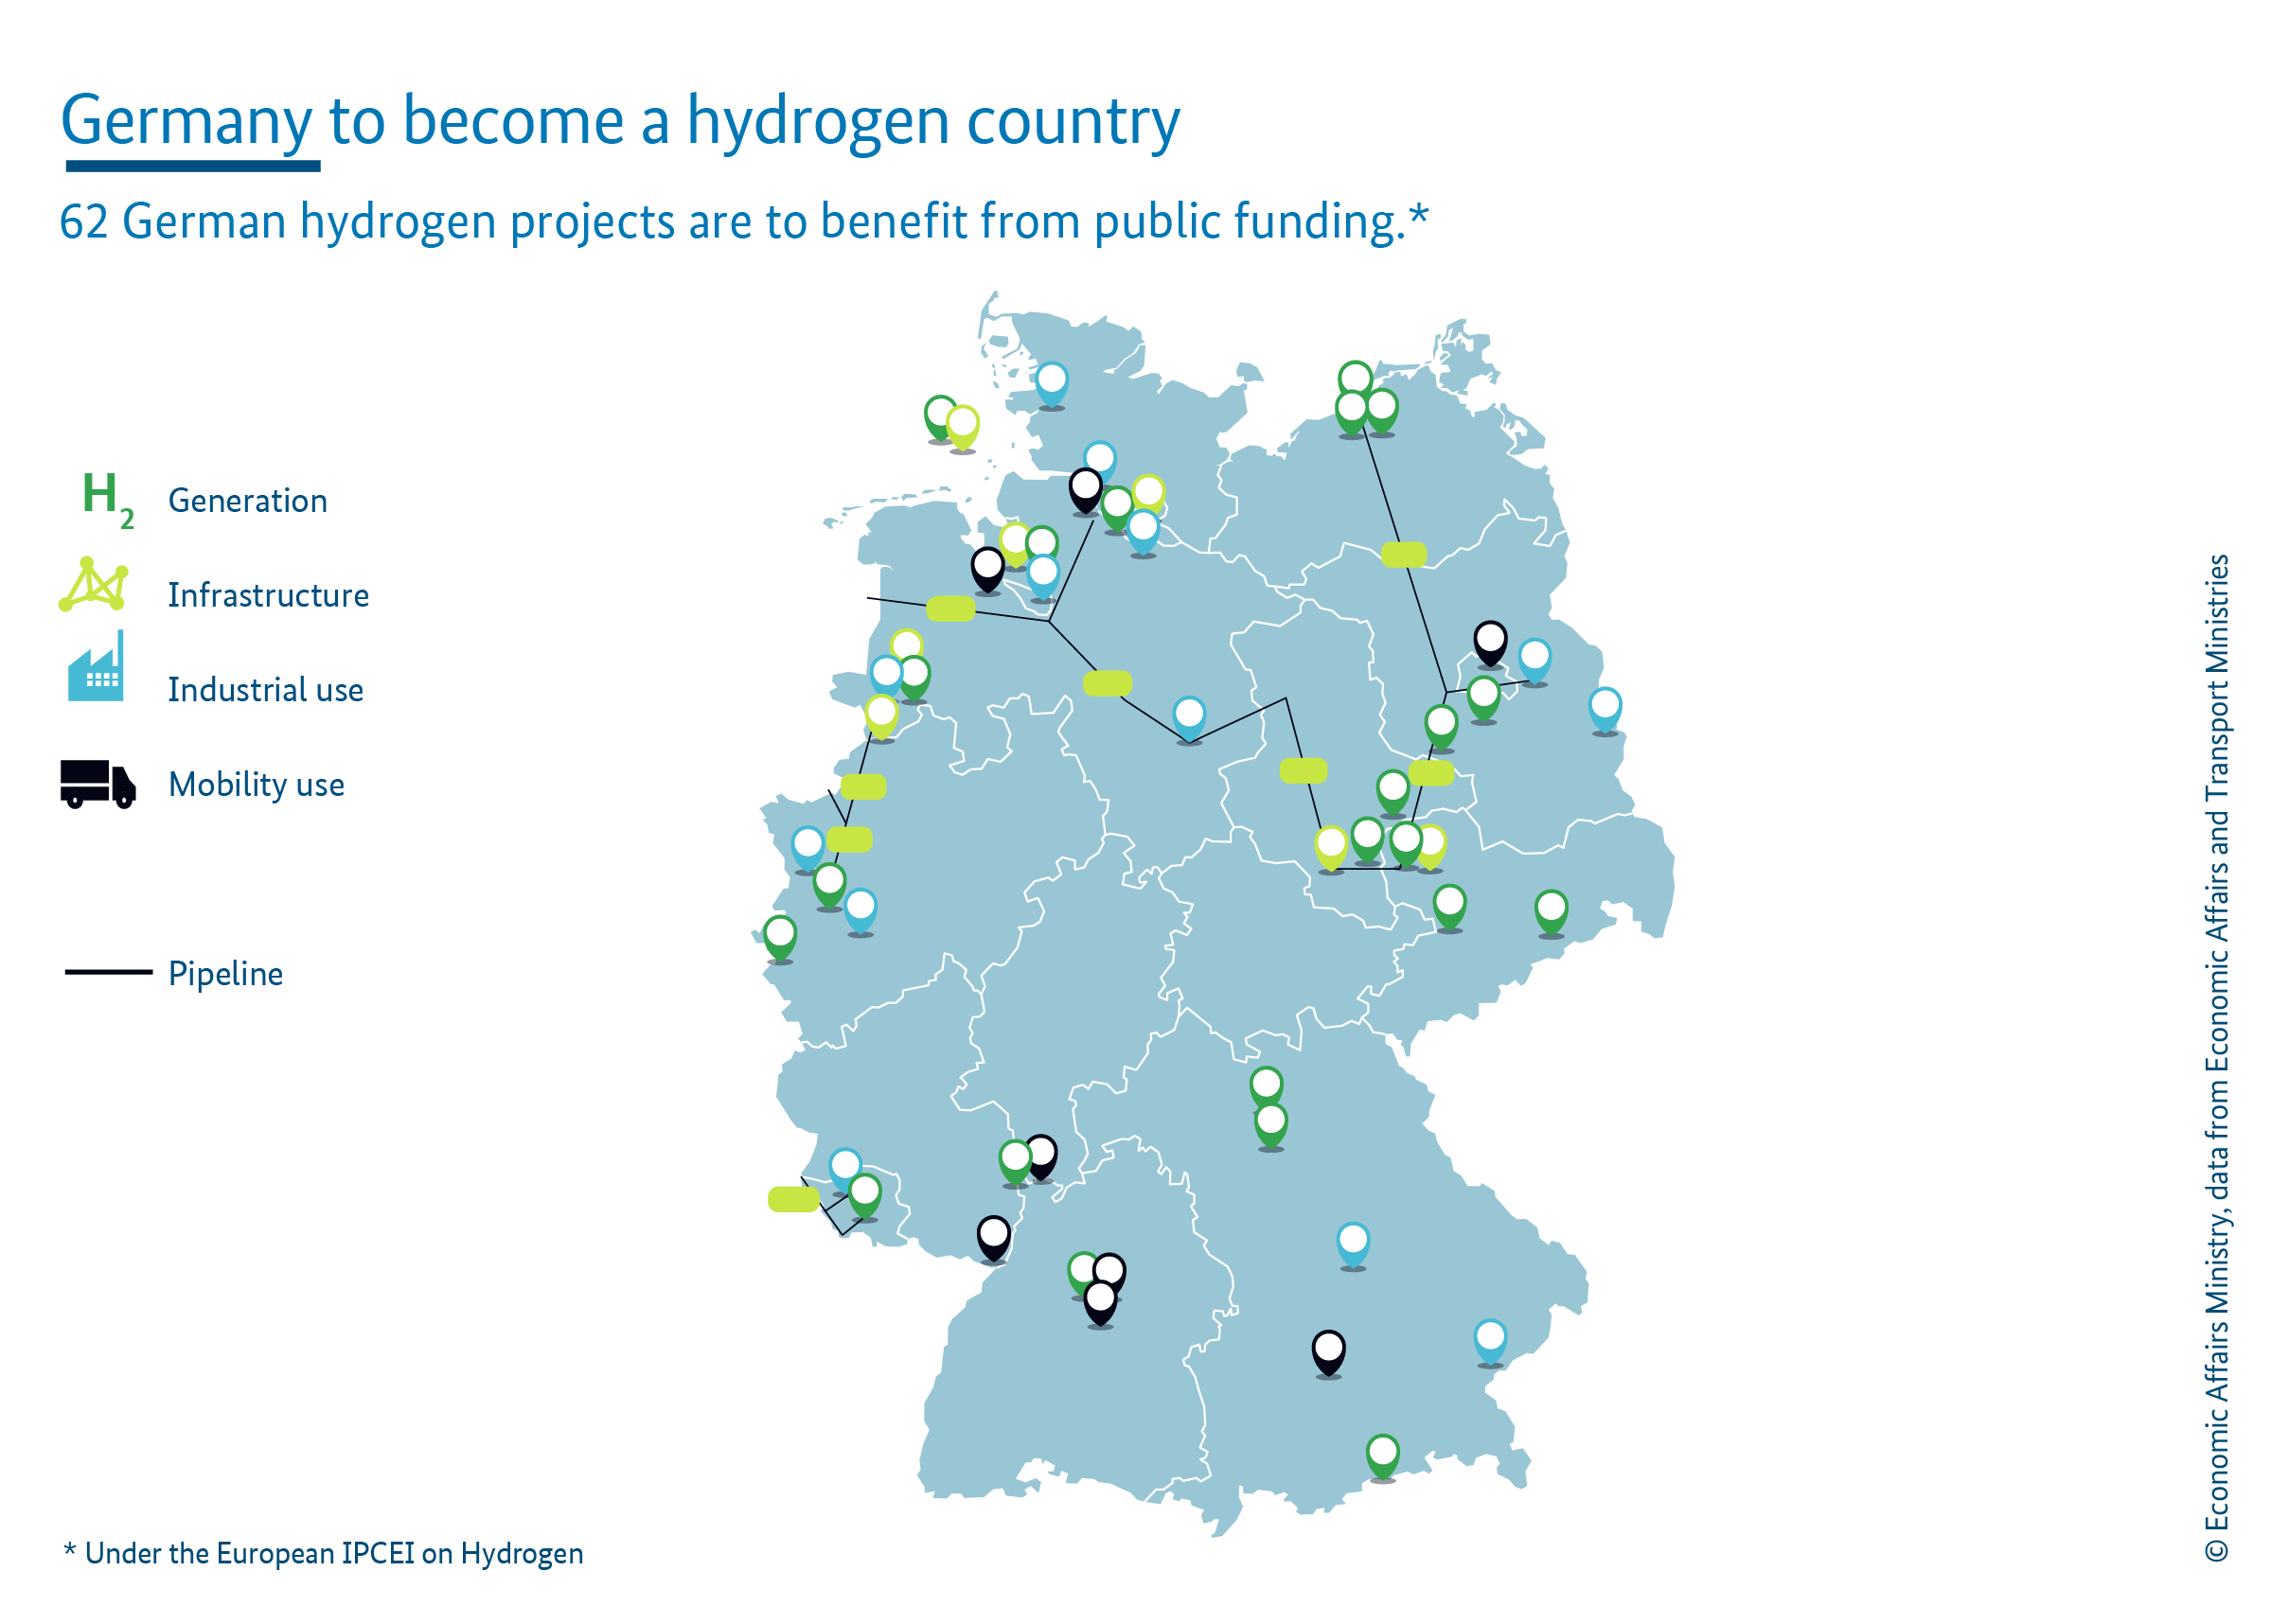 Germany set to become a hydrogen country